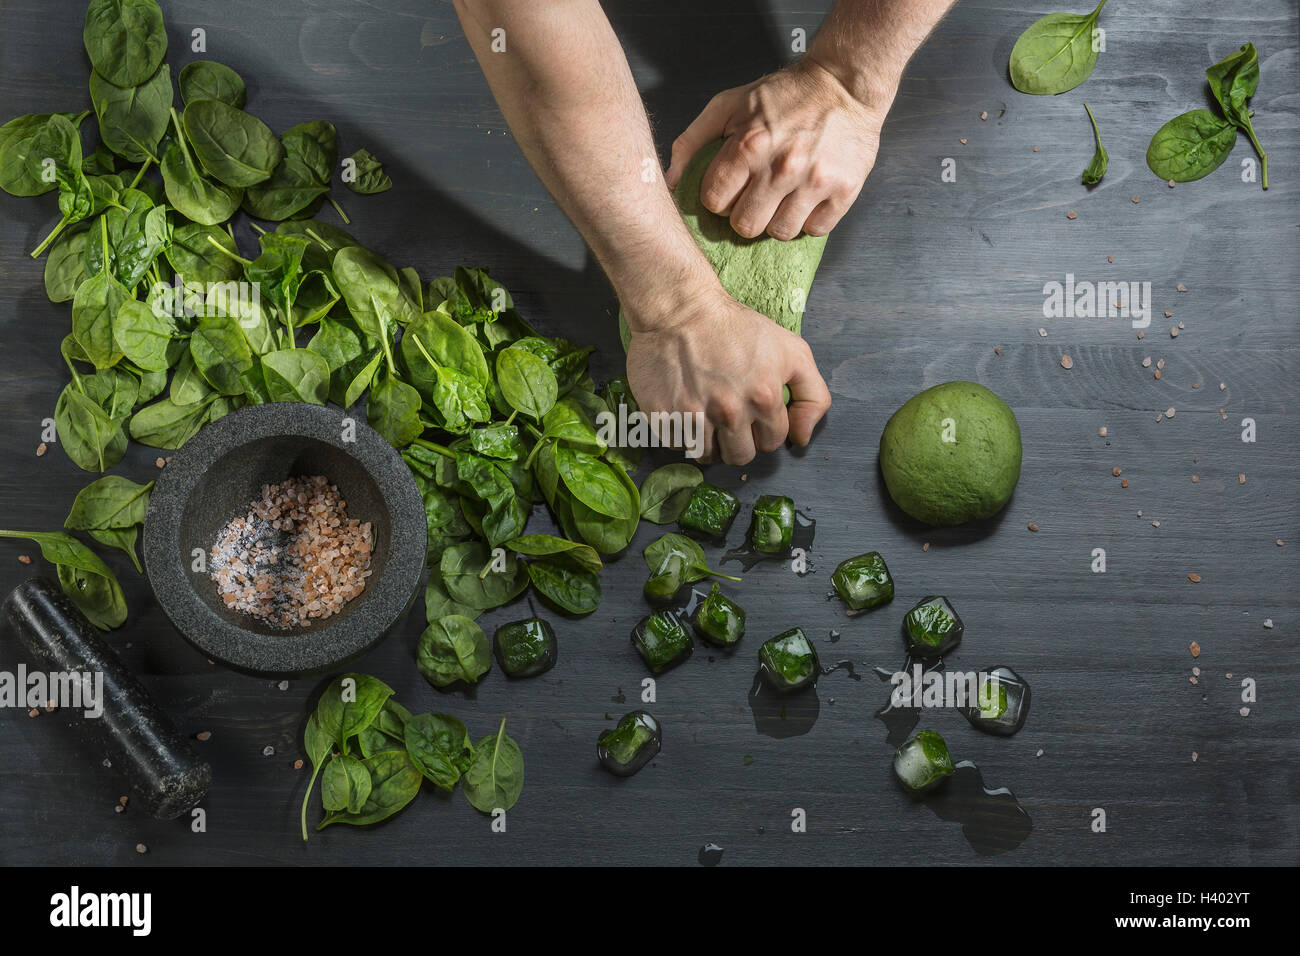 https://c8.alamy.com/comp/H402YT/cropped-image-of-hands-kneading-green-dough-by-basil-ice-cubes-at-H402YT.jpg